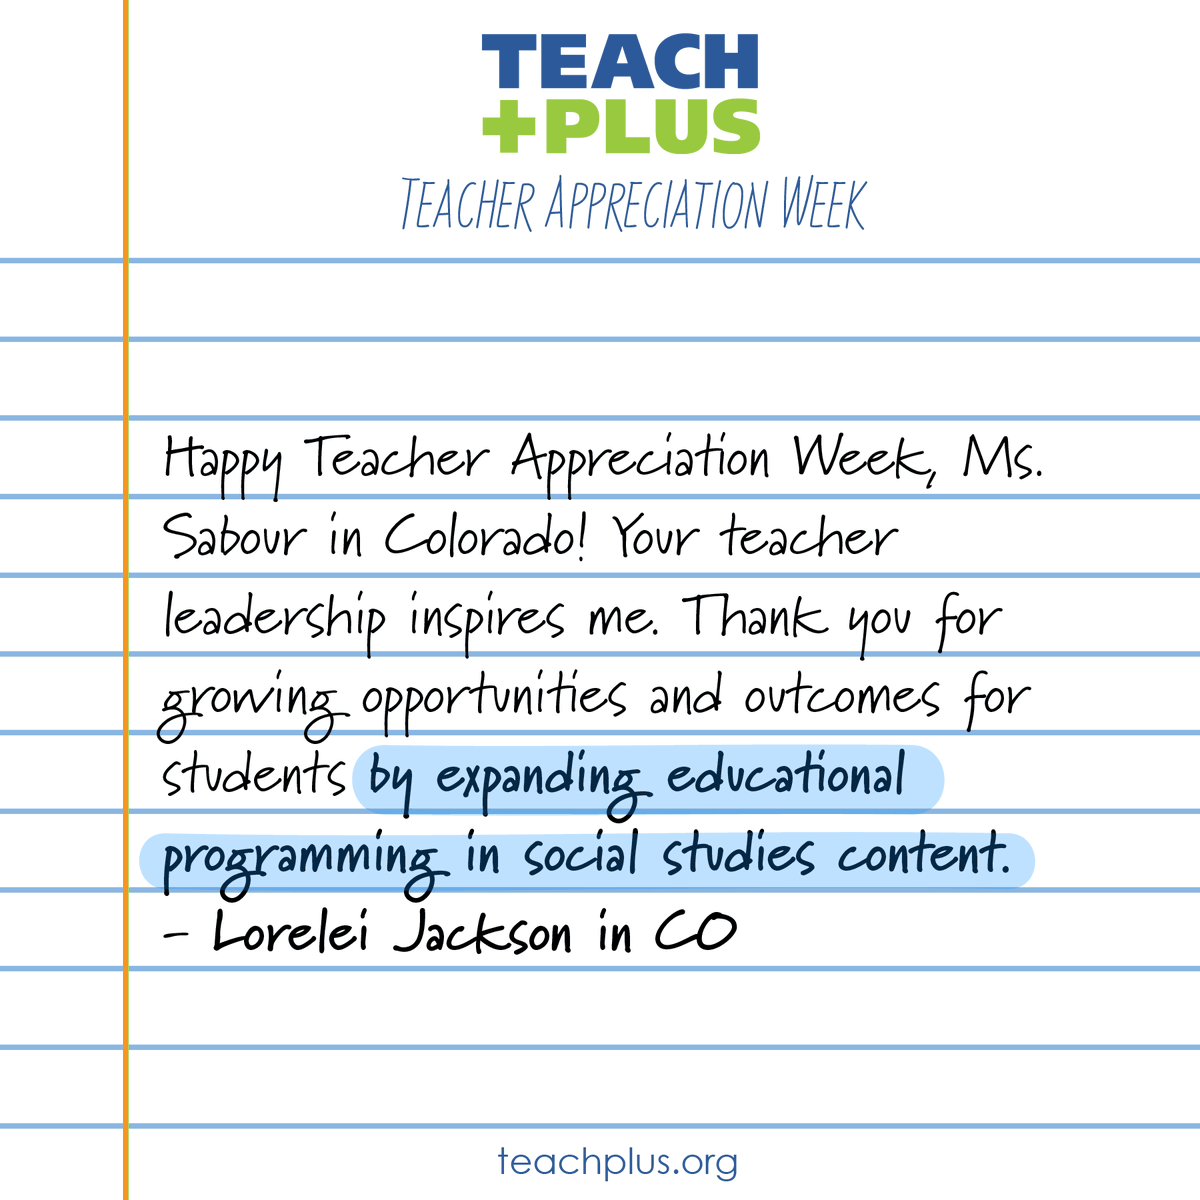 This #TeacherAppreciationWeek, @TeachPlusCO alumna Lorelei Jackson celebrates Colorado teacher Ms. Sabour. 'Thank you for growing opportunities and outcomes for students by expanding educational programming in social studies content.'